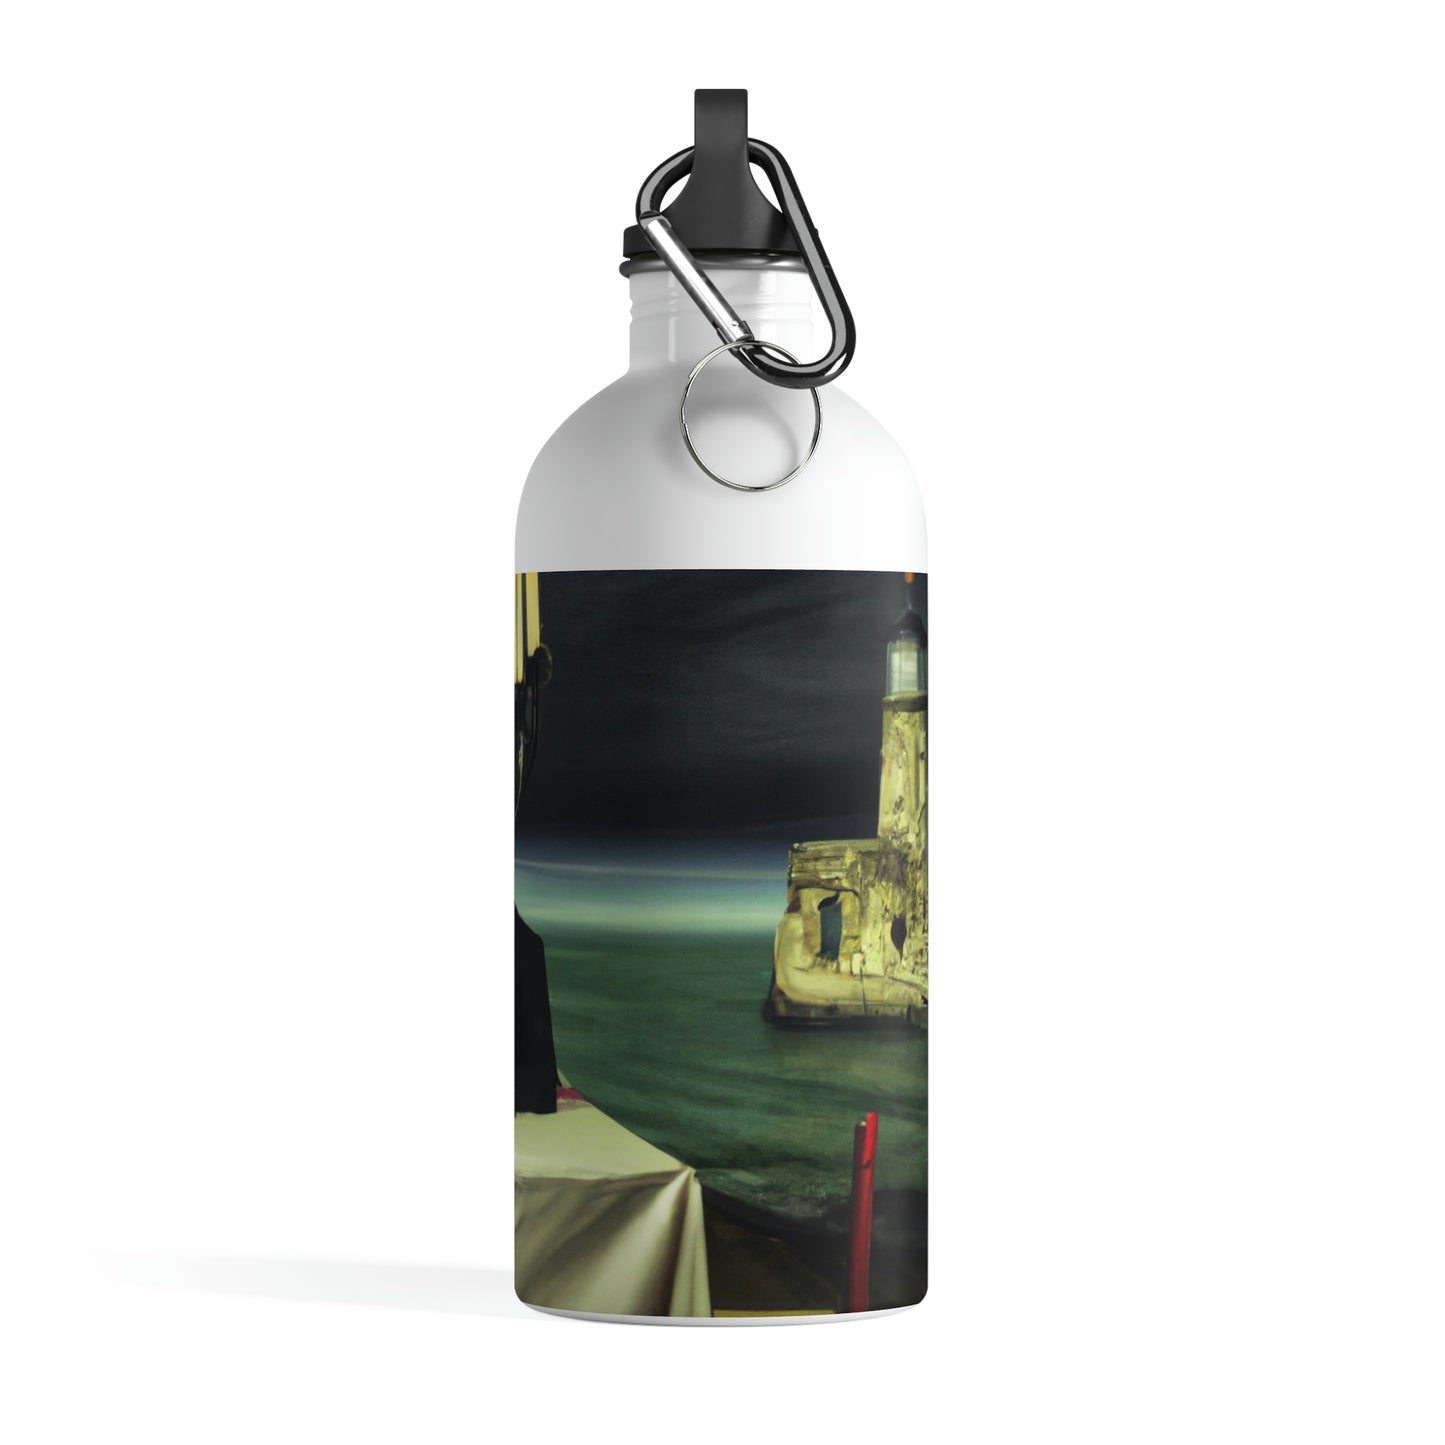 "A Beacon of Romance: An Intimate Candlelit Dinner in a Forgotten Lighthouse" - The Alien Stainless Steel Water Bottle